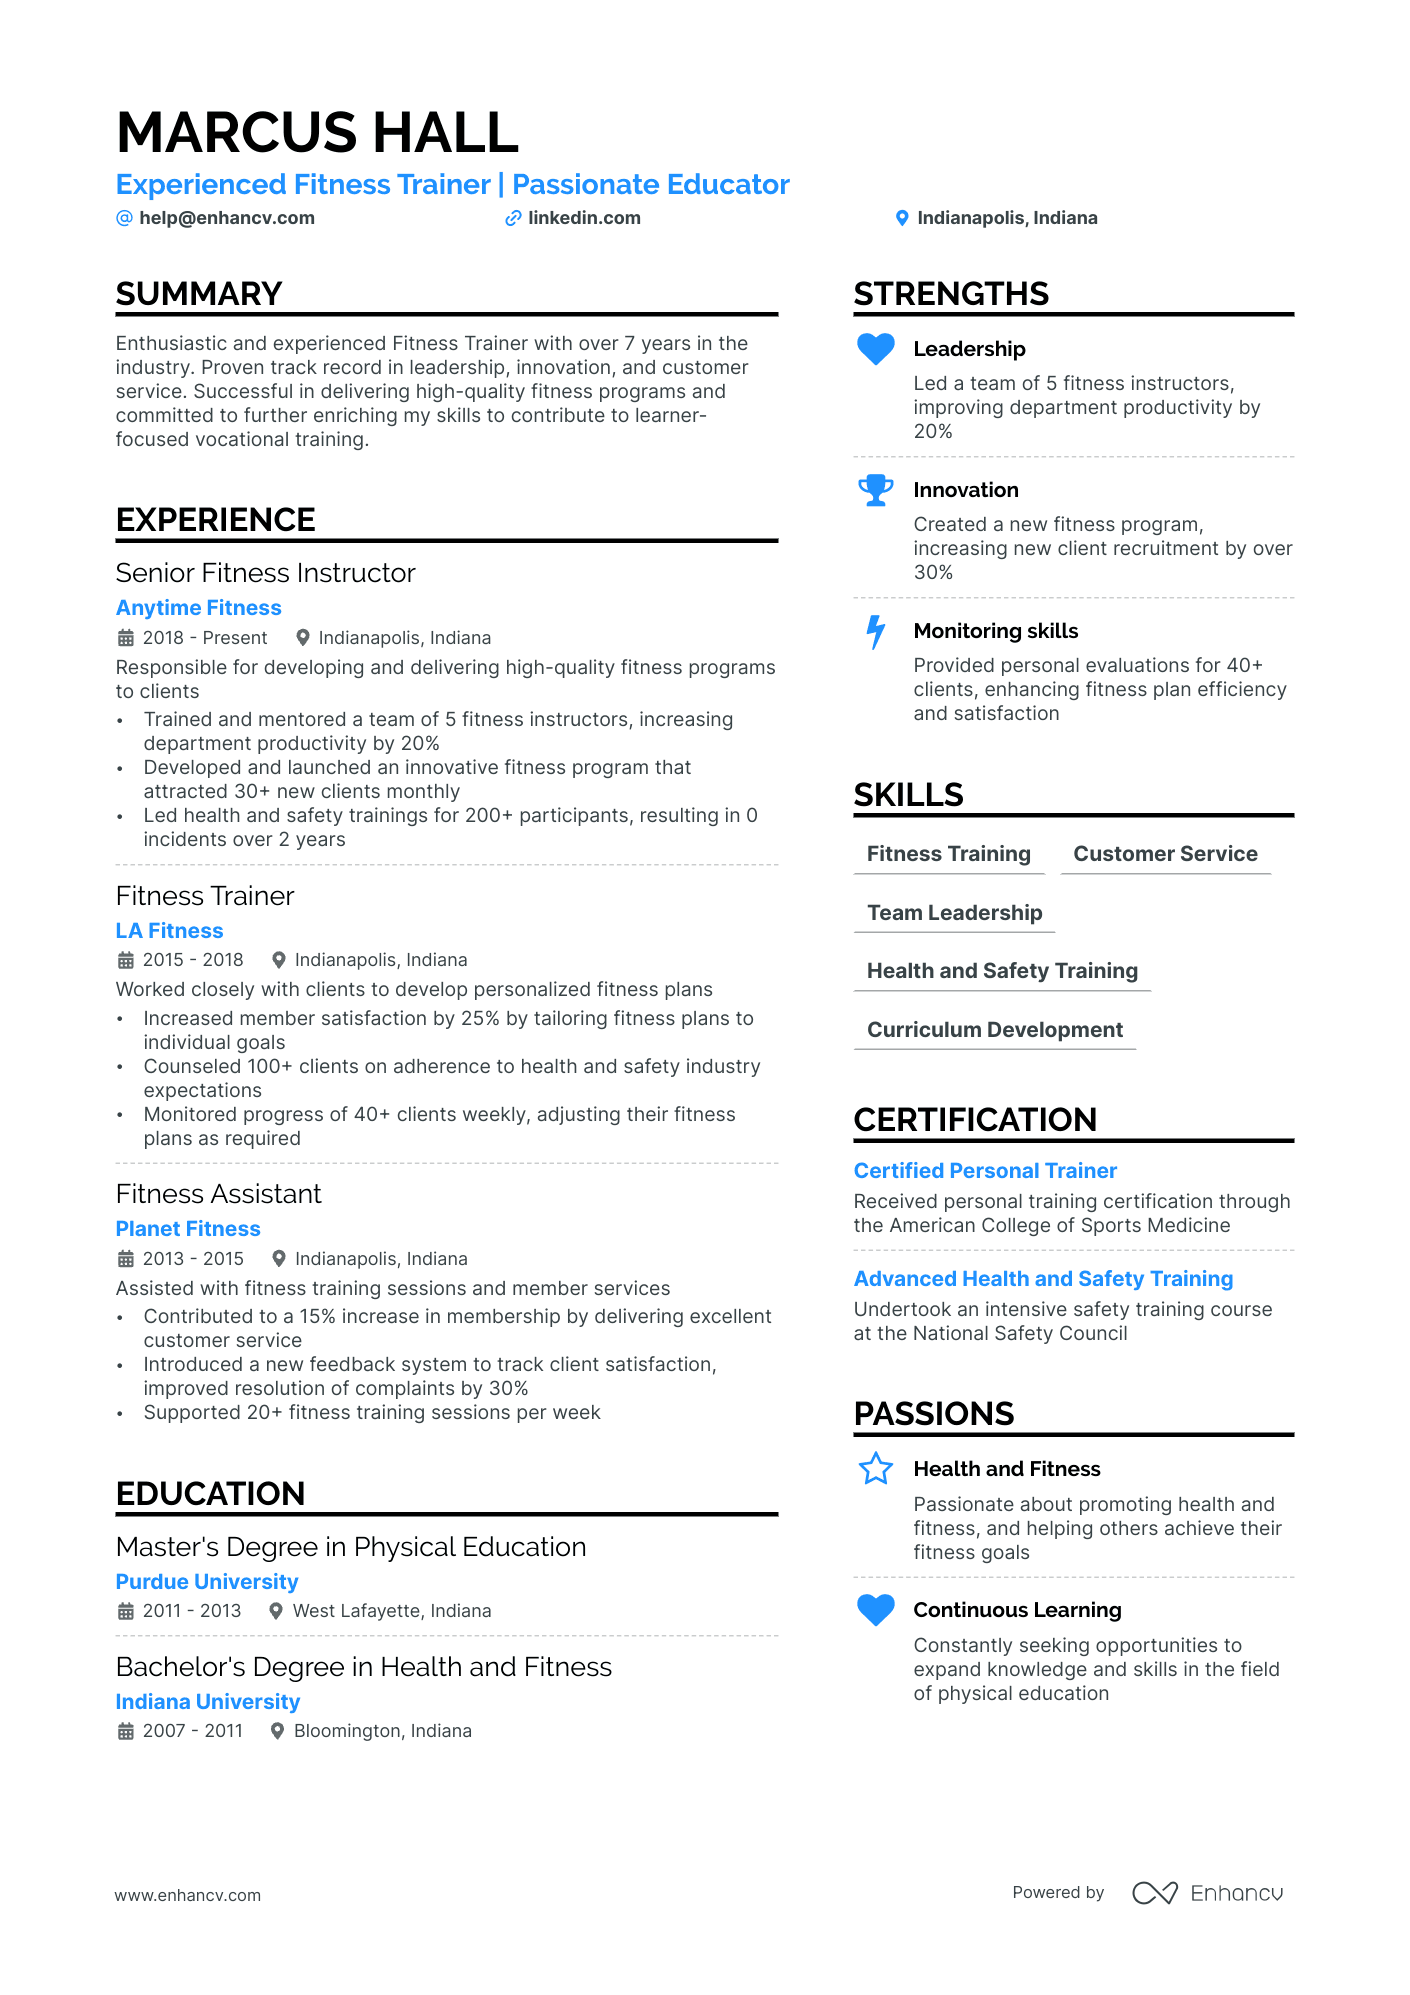 Fitness Trainer resume example